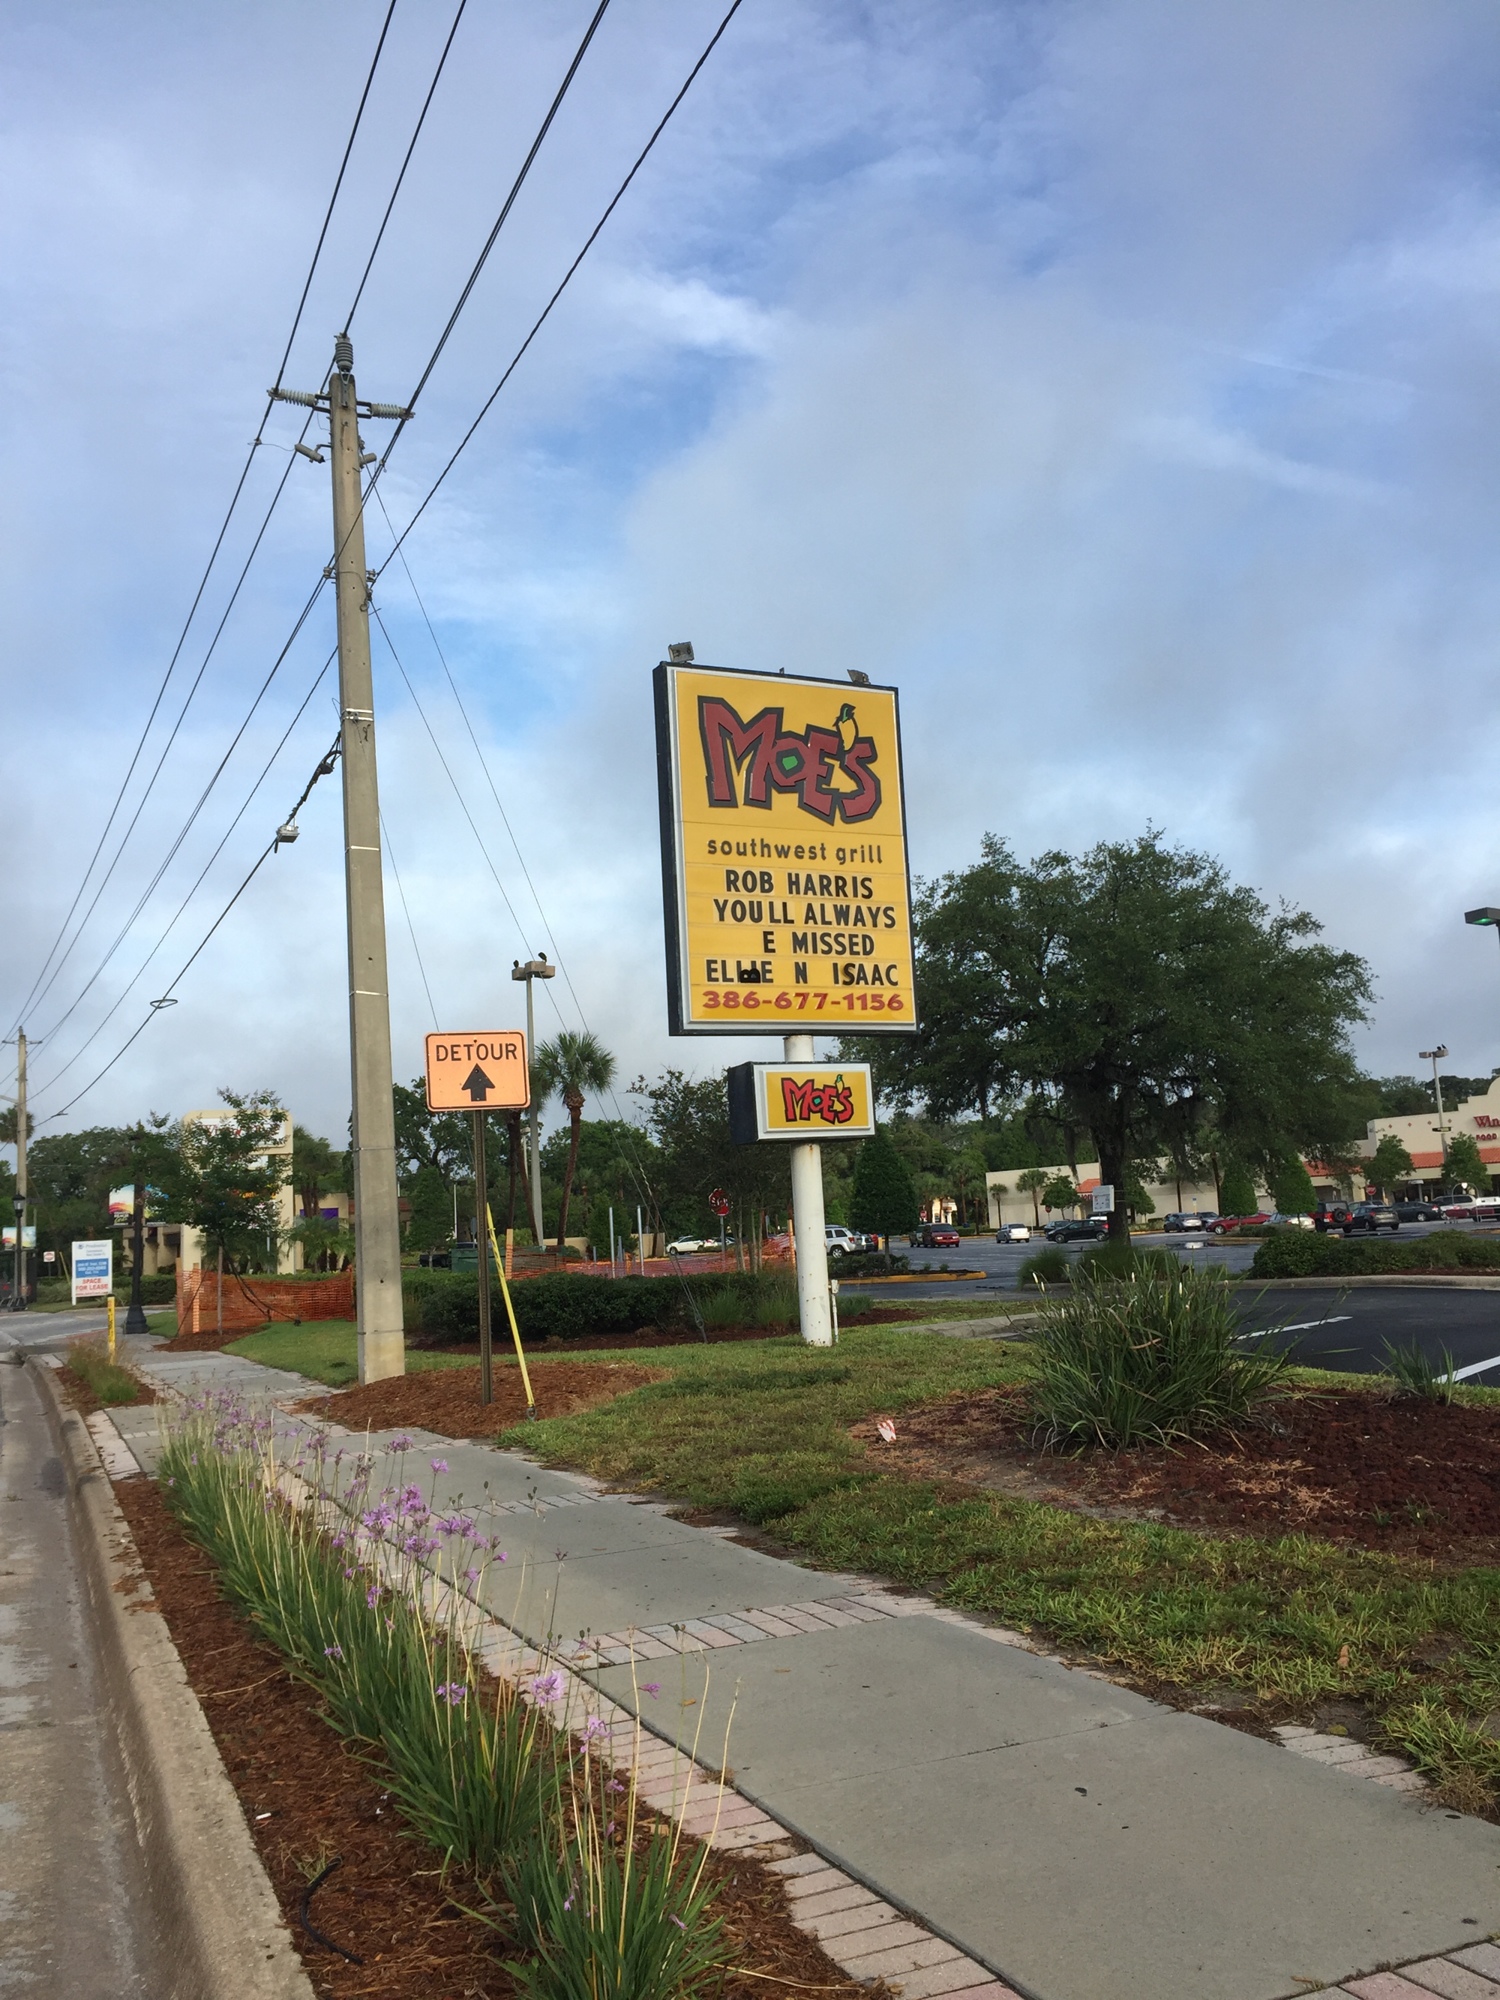 Moe's Southwest Grille in Ormond Beach had this posted on their sign (Courtesy photo).